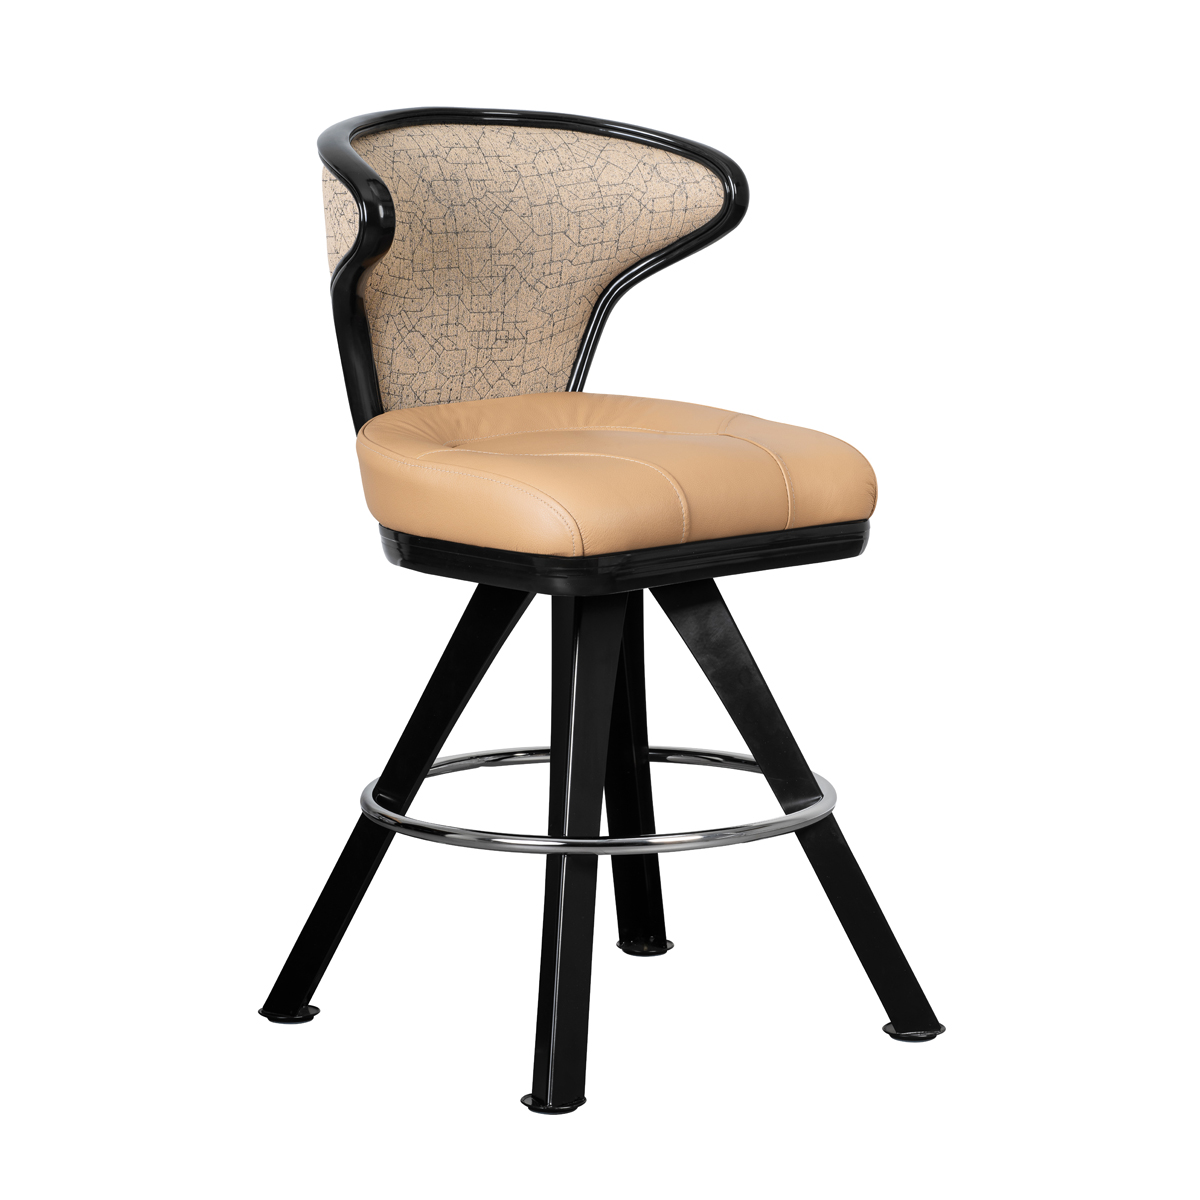 Mercury casino gaming stool for table games and slot machines